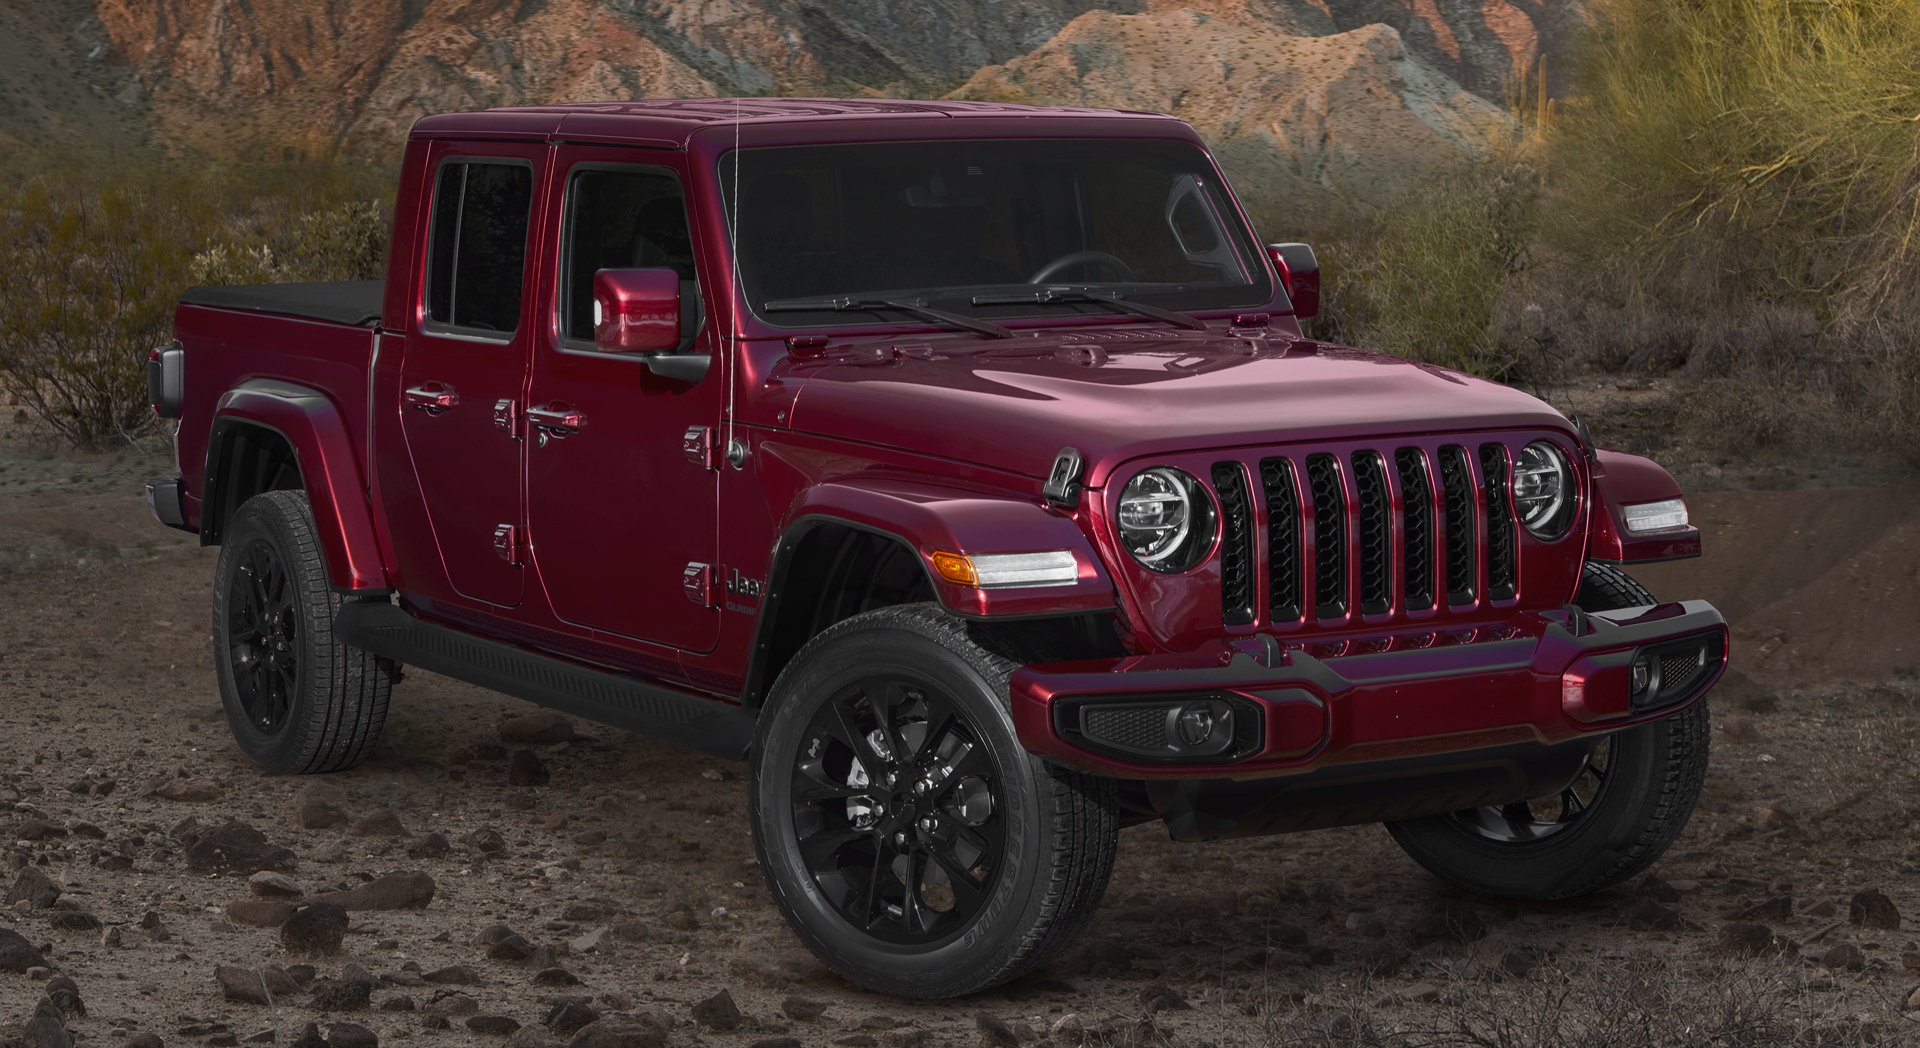 Jeep® Adds Snazzberry Exterior Color To 2021 Wrangler & Gladiator